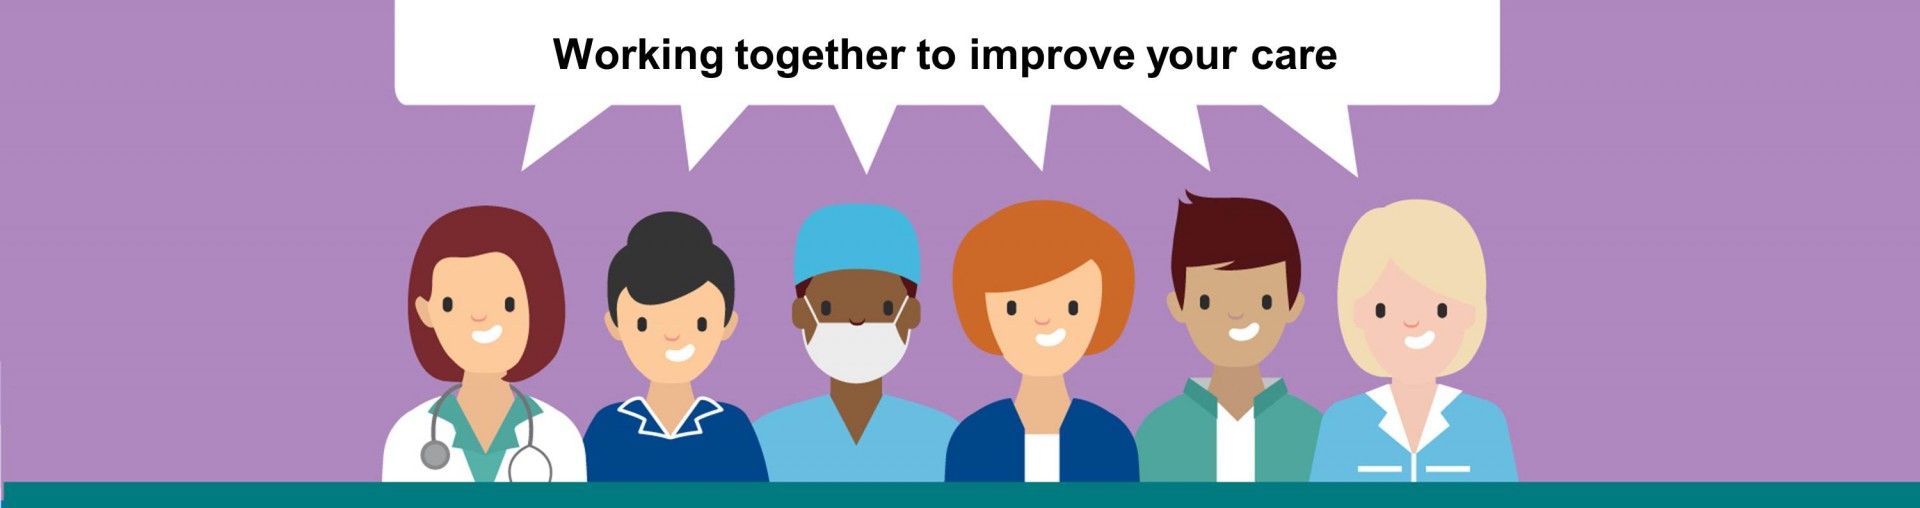 Leeds Care Record: Working together to improve your care